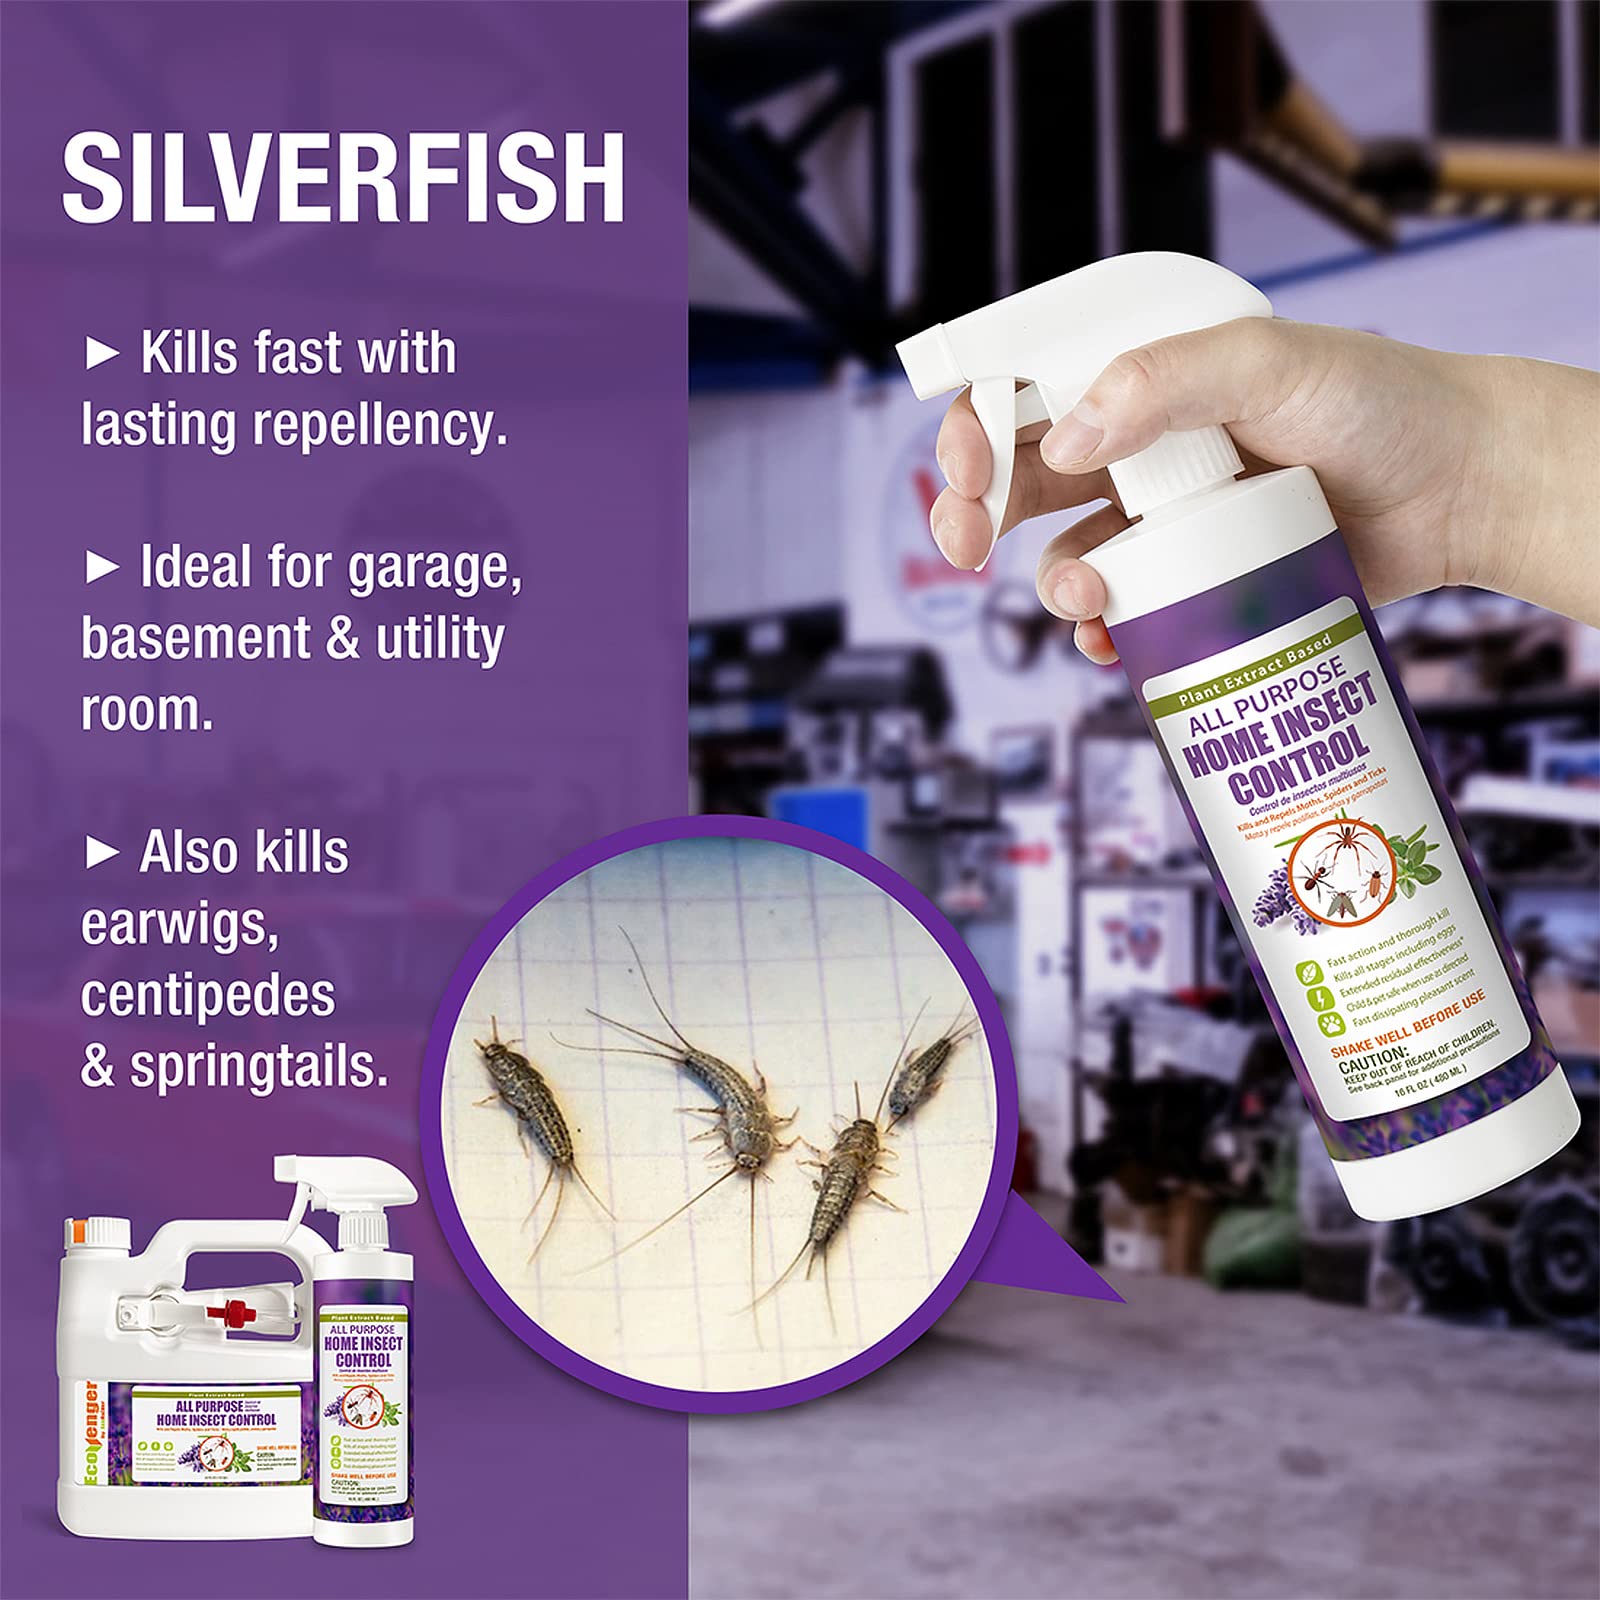 Quality Silverfish Pest Control Products & Services – EcoPest Supply